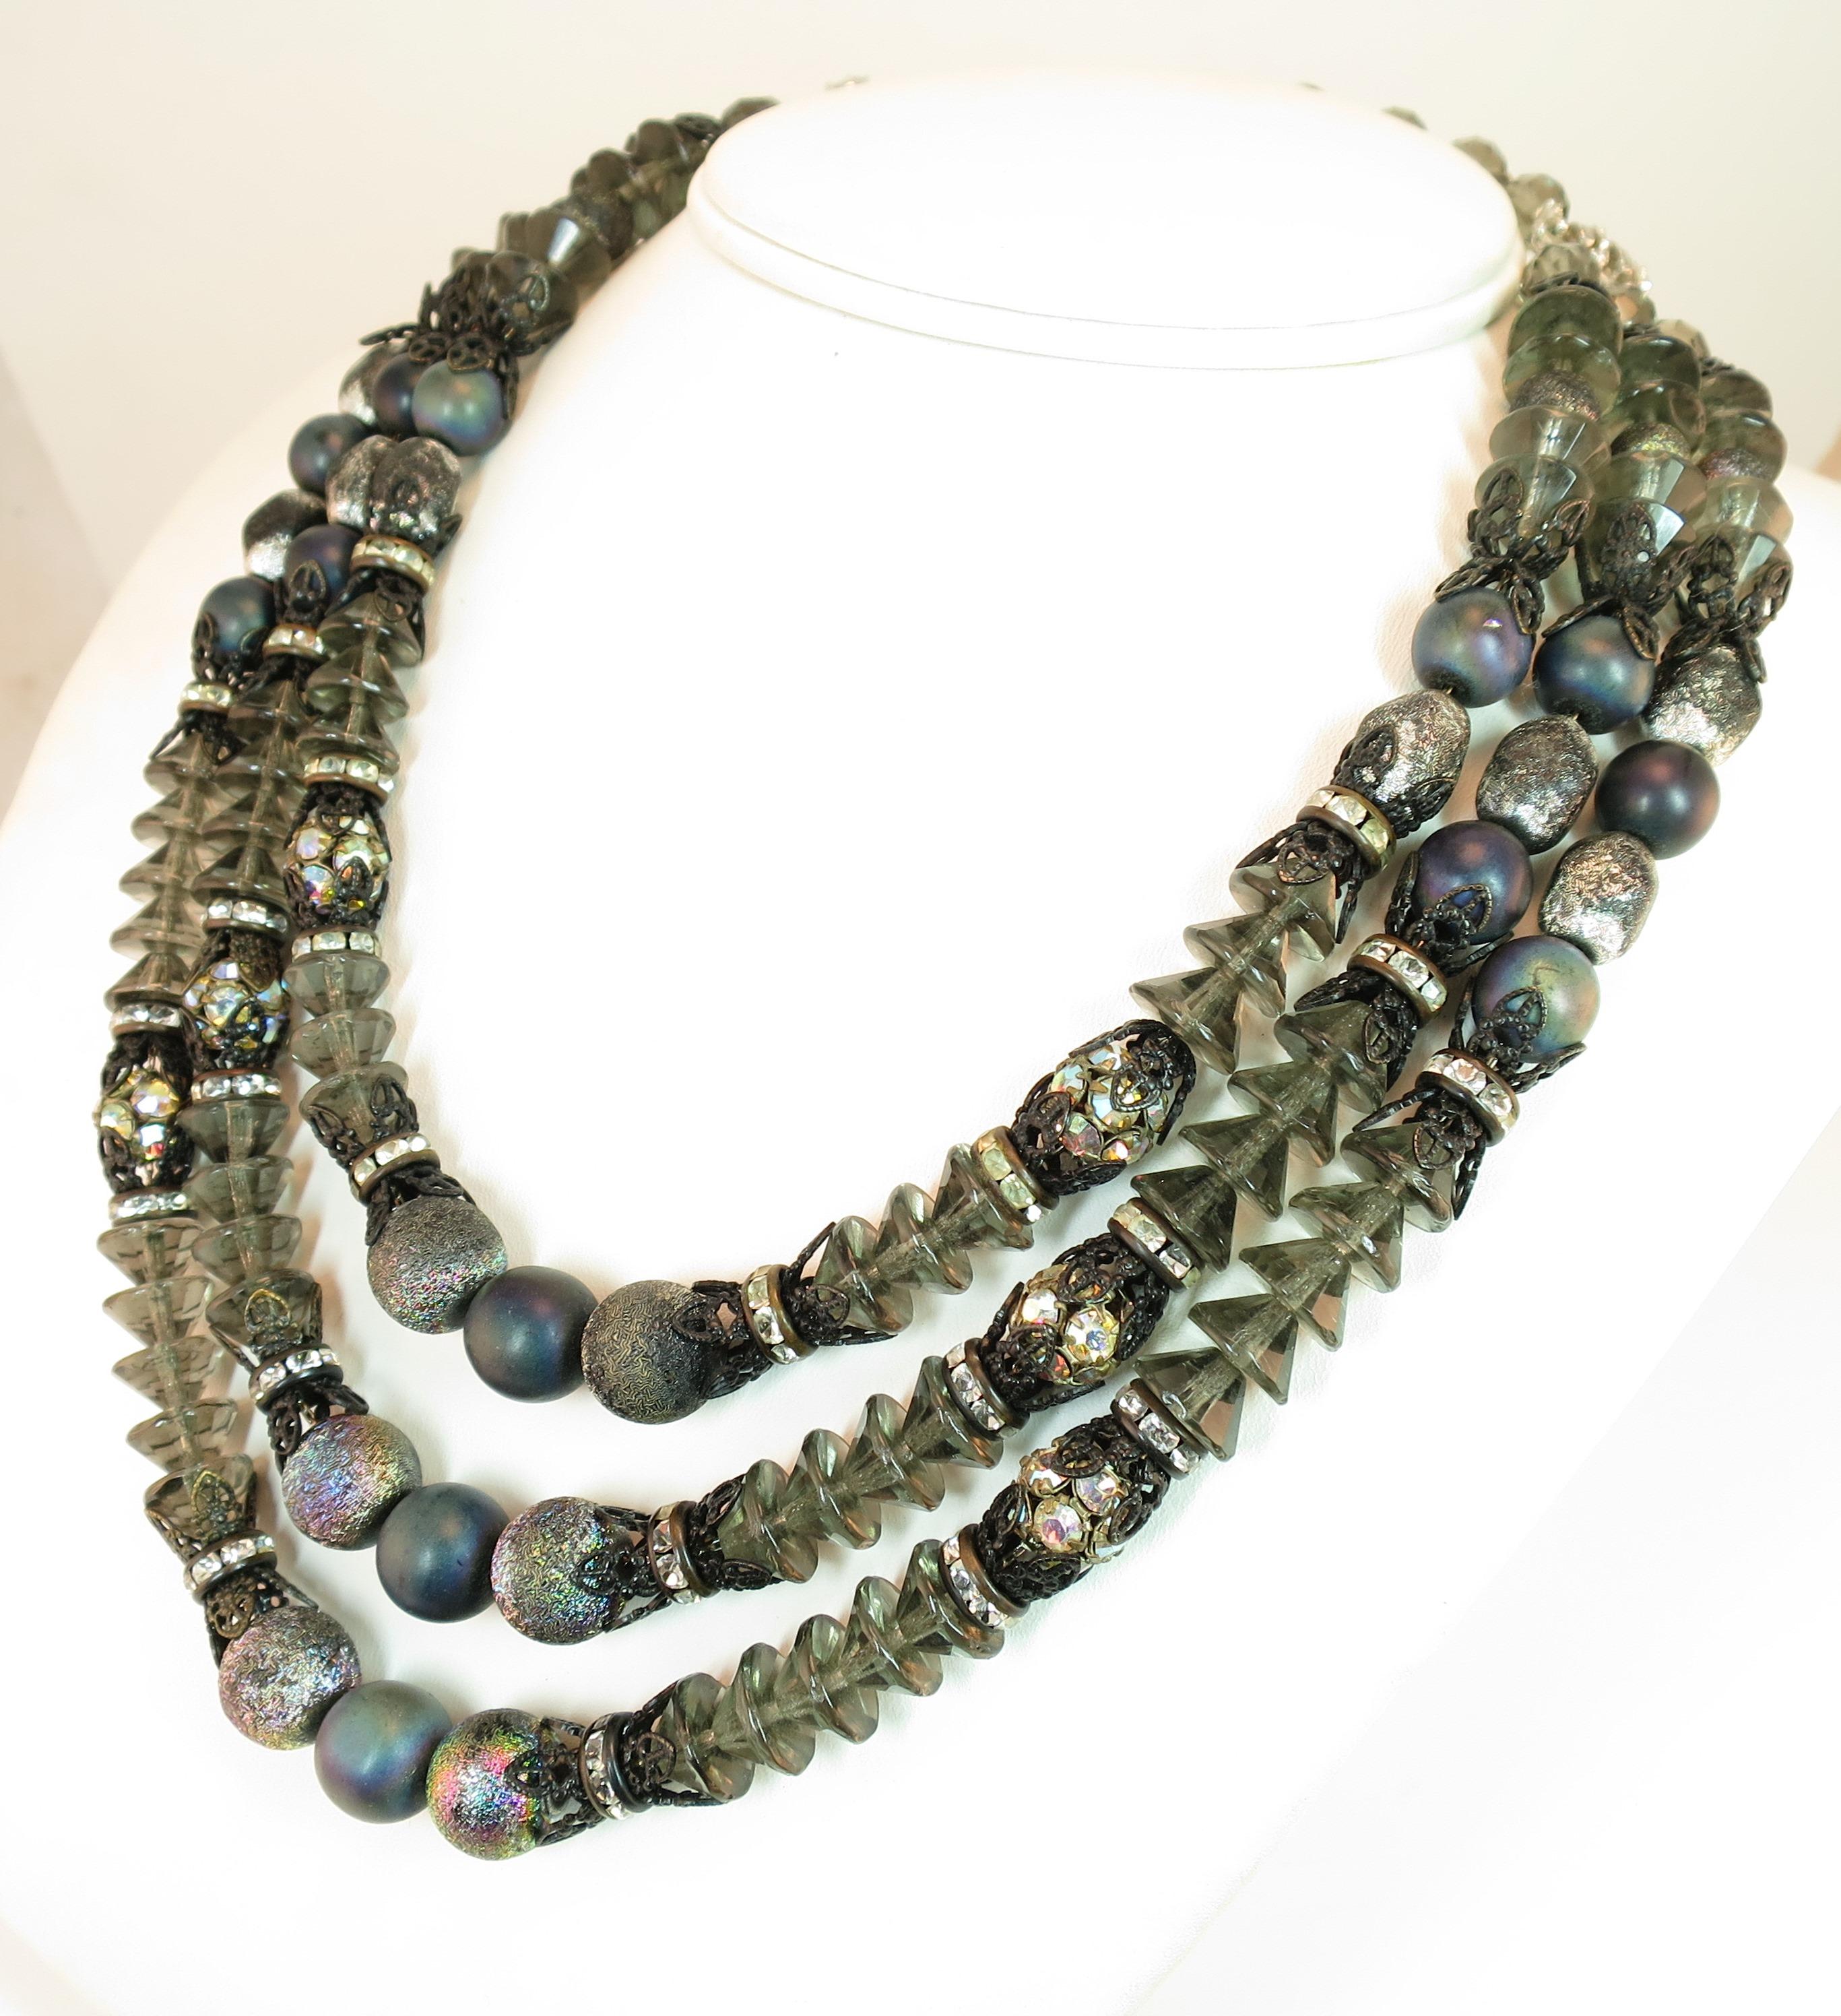 Hobe Mid-Century Iridescent Black Crystal Parure 1950s In Good Condition For Sale In Burbank, CA